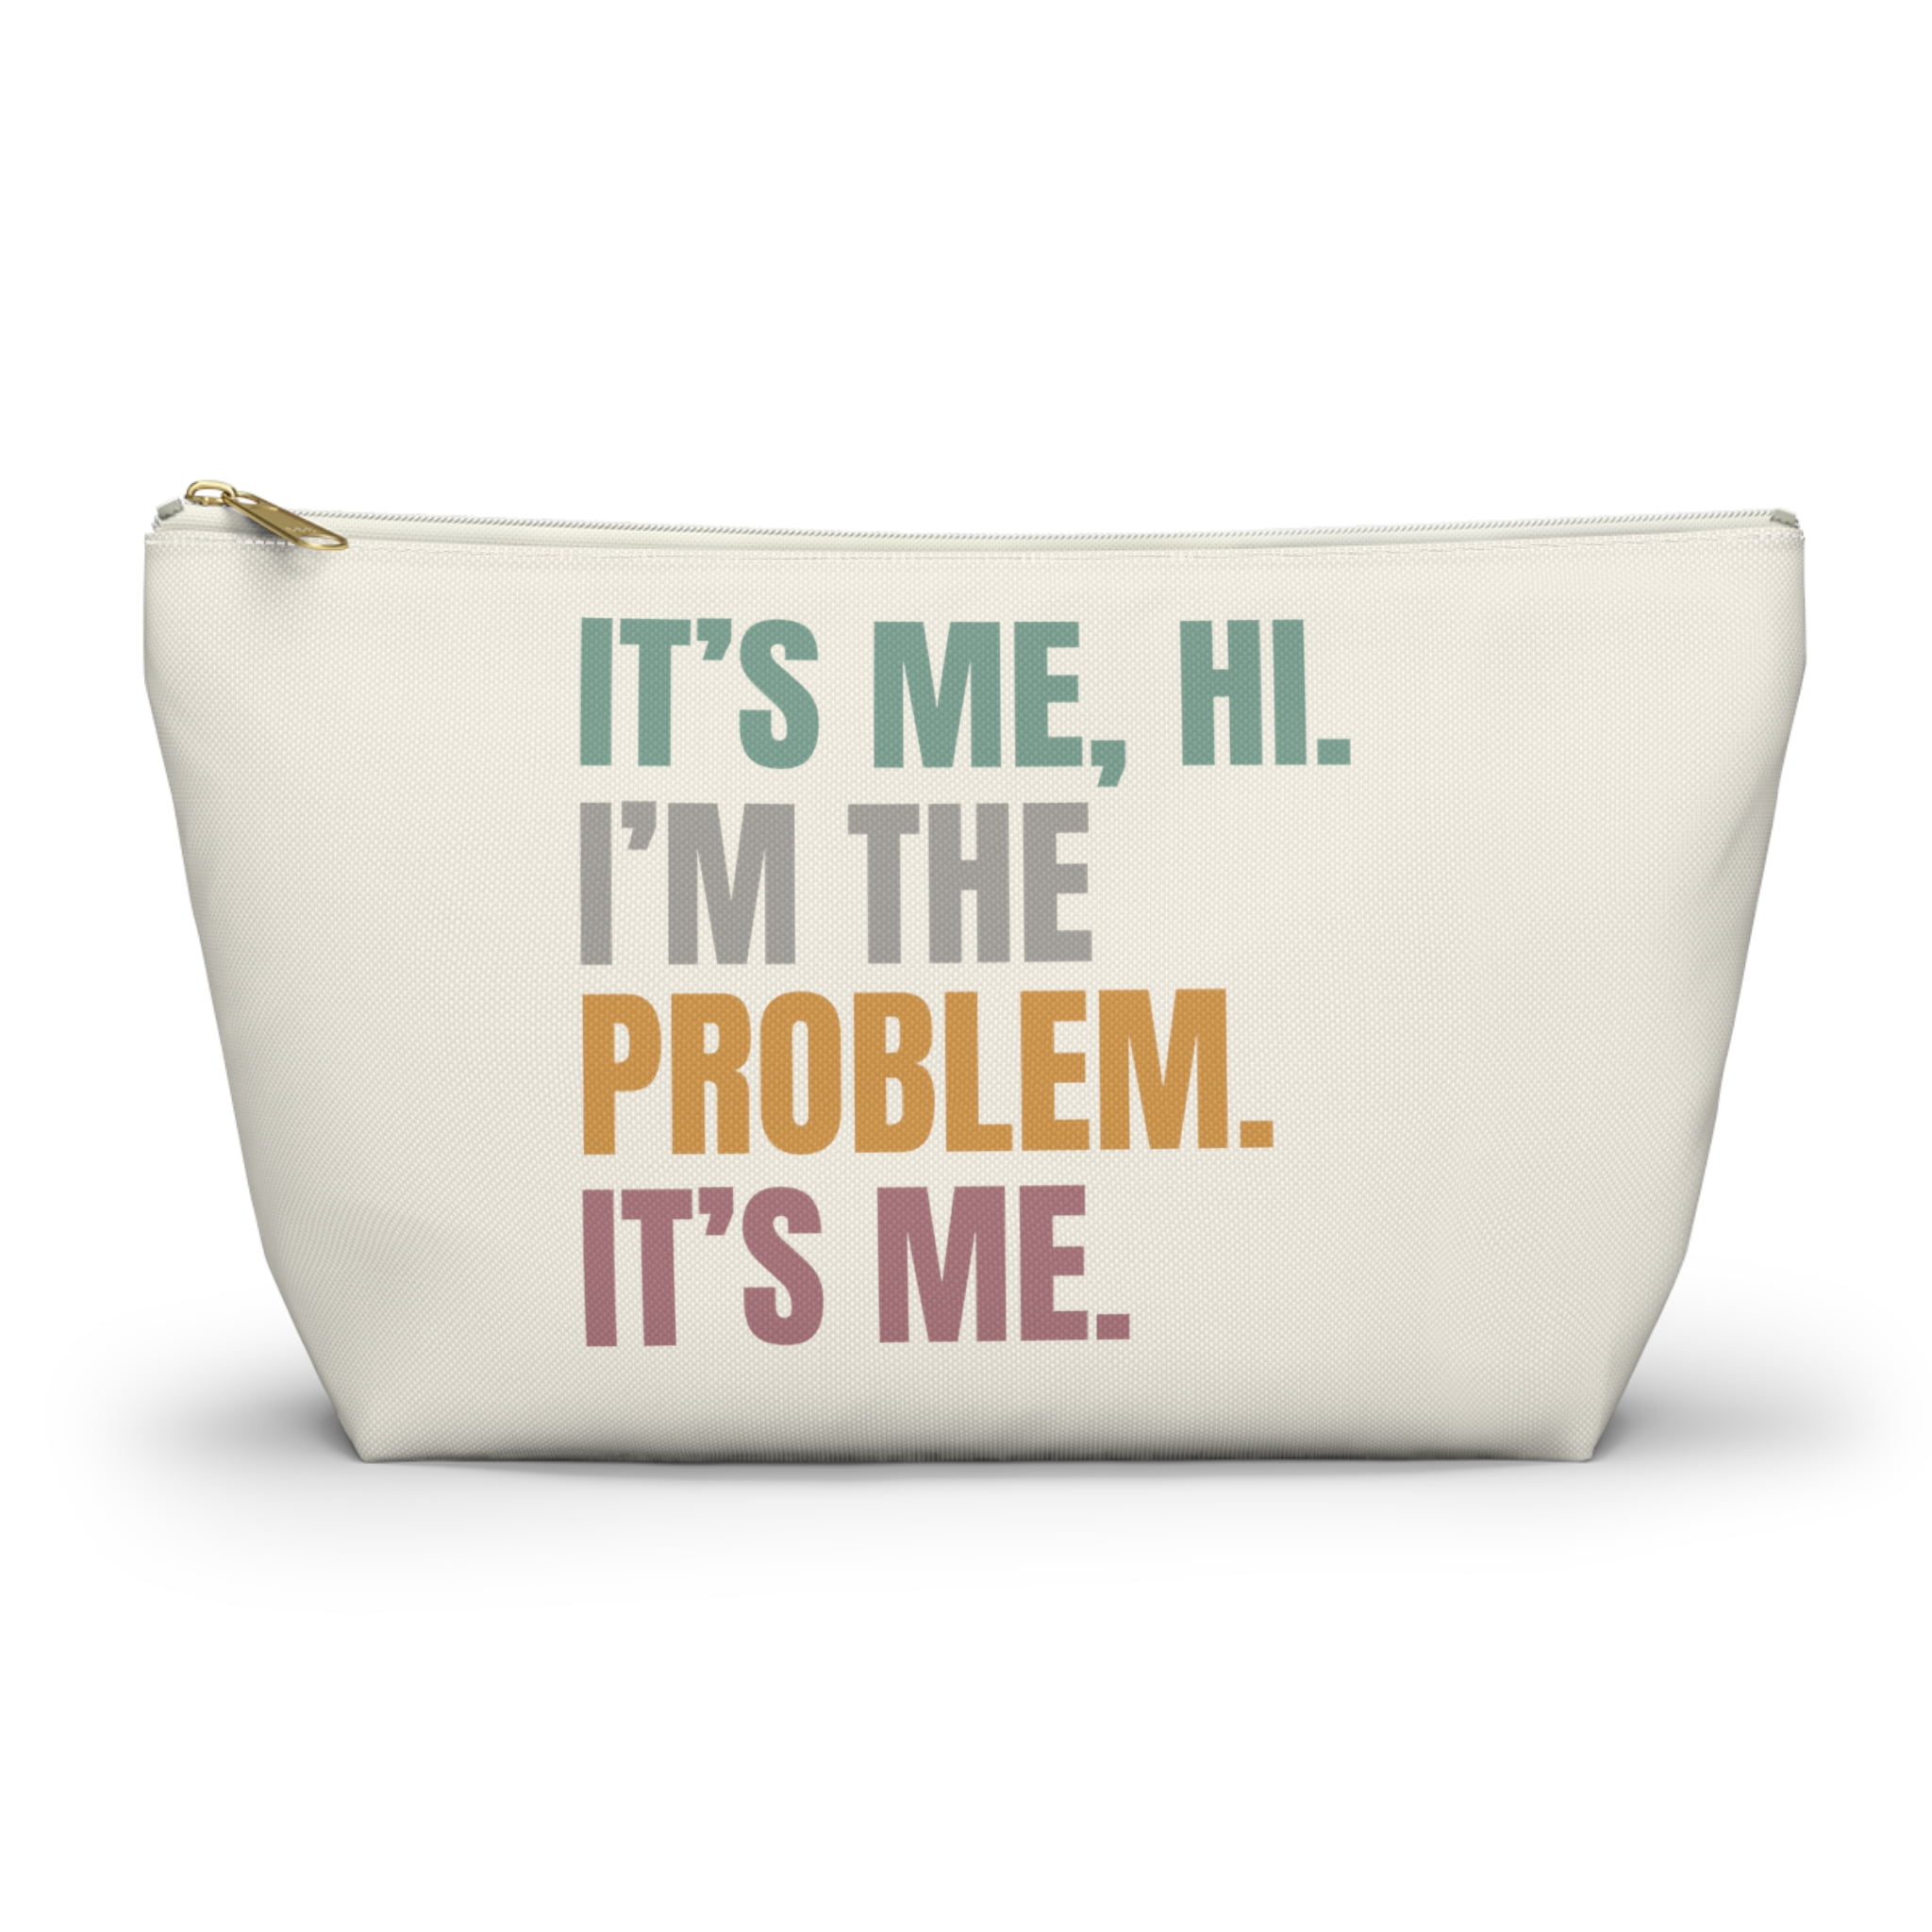 Toss Designs A Lot Going on - Taylor Swift: Jumbo Cosmetic Bag